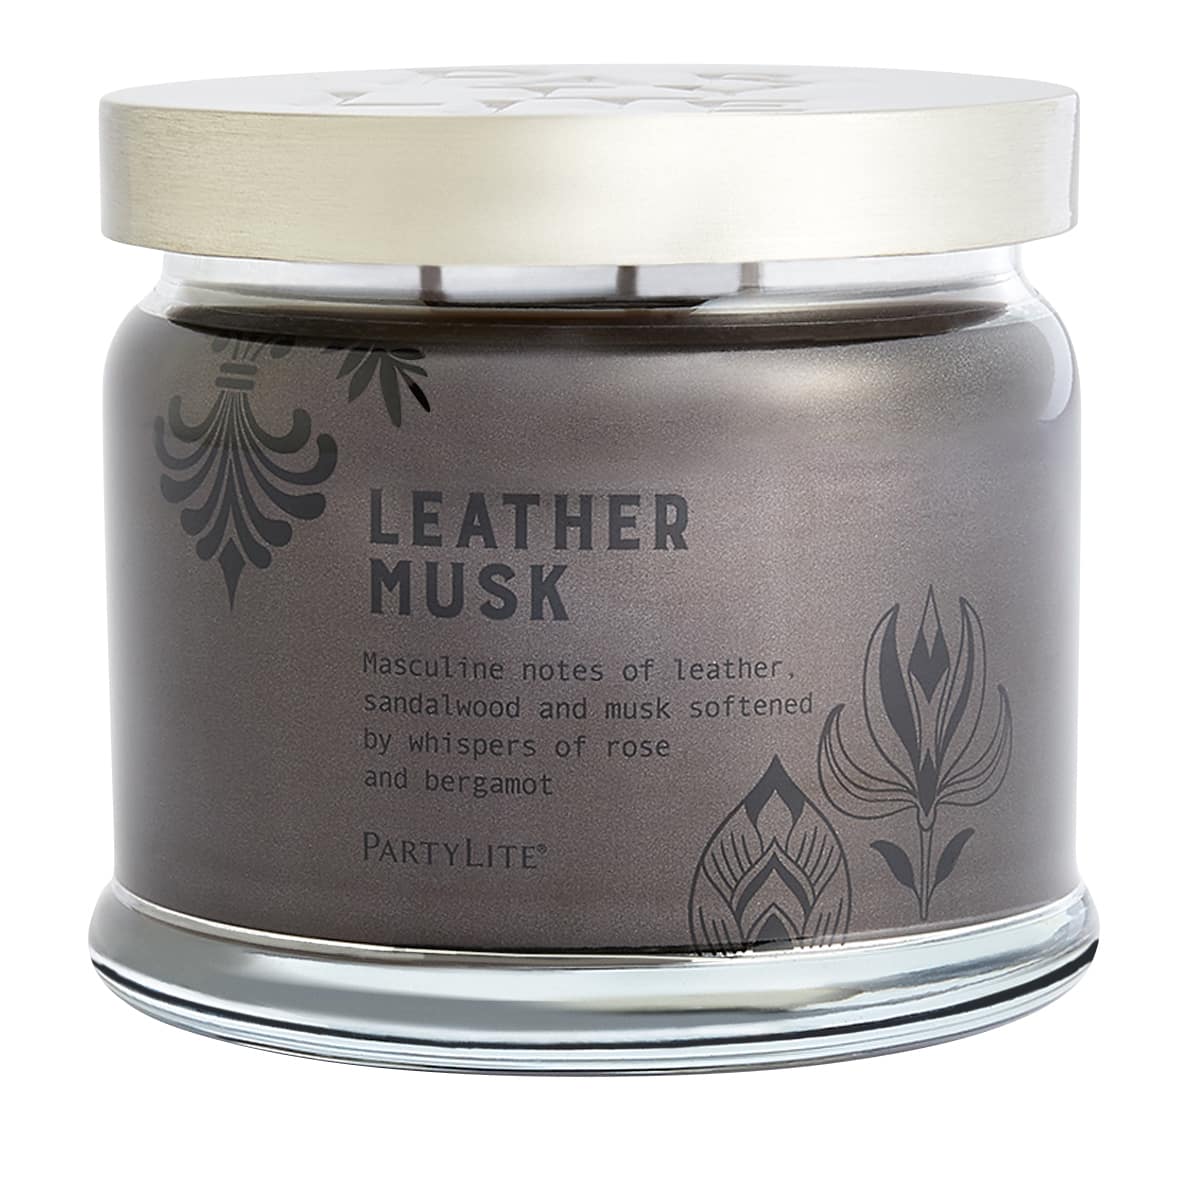 Leather Musk 3-Wick Jar Candle